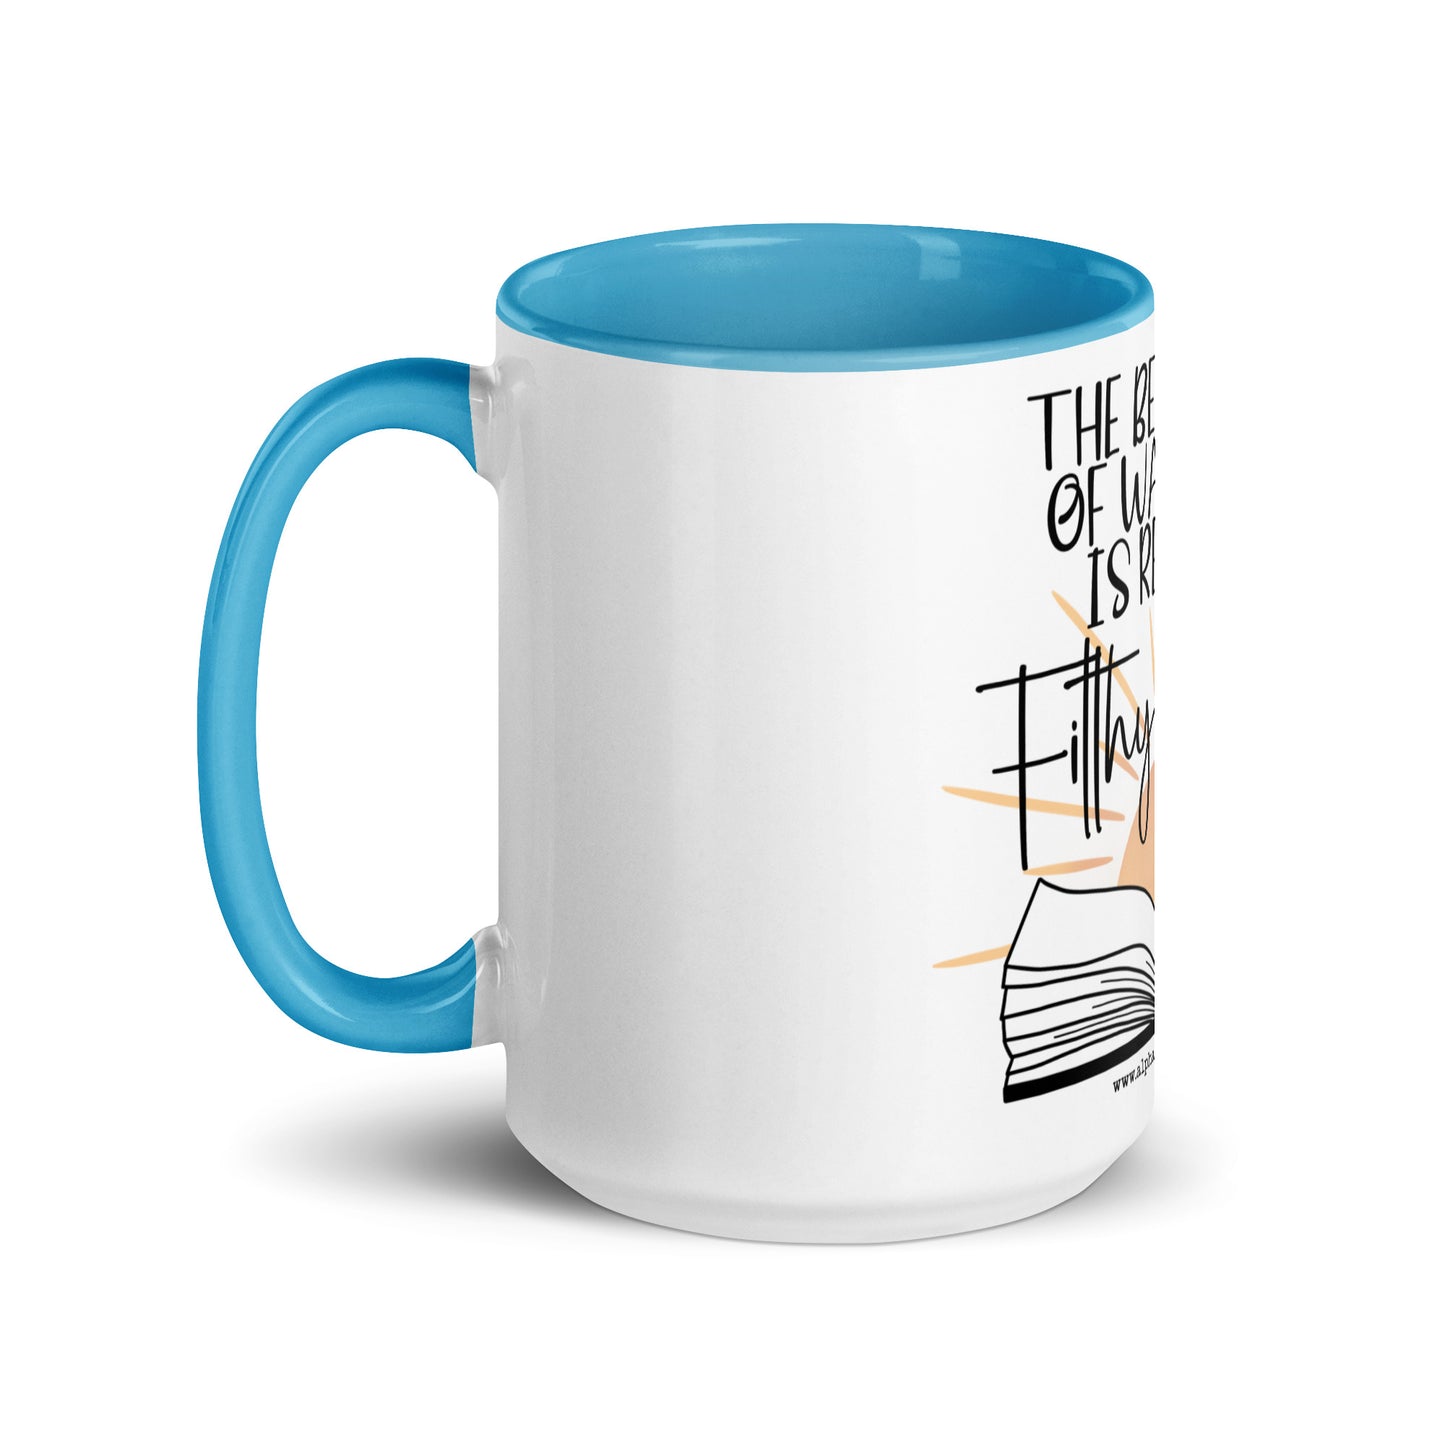 Best Part of Waking Up Mug with Color Inside